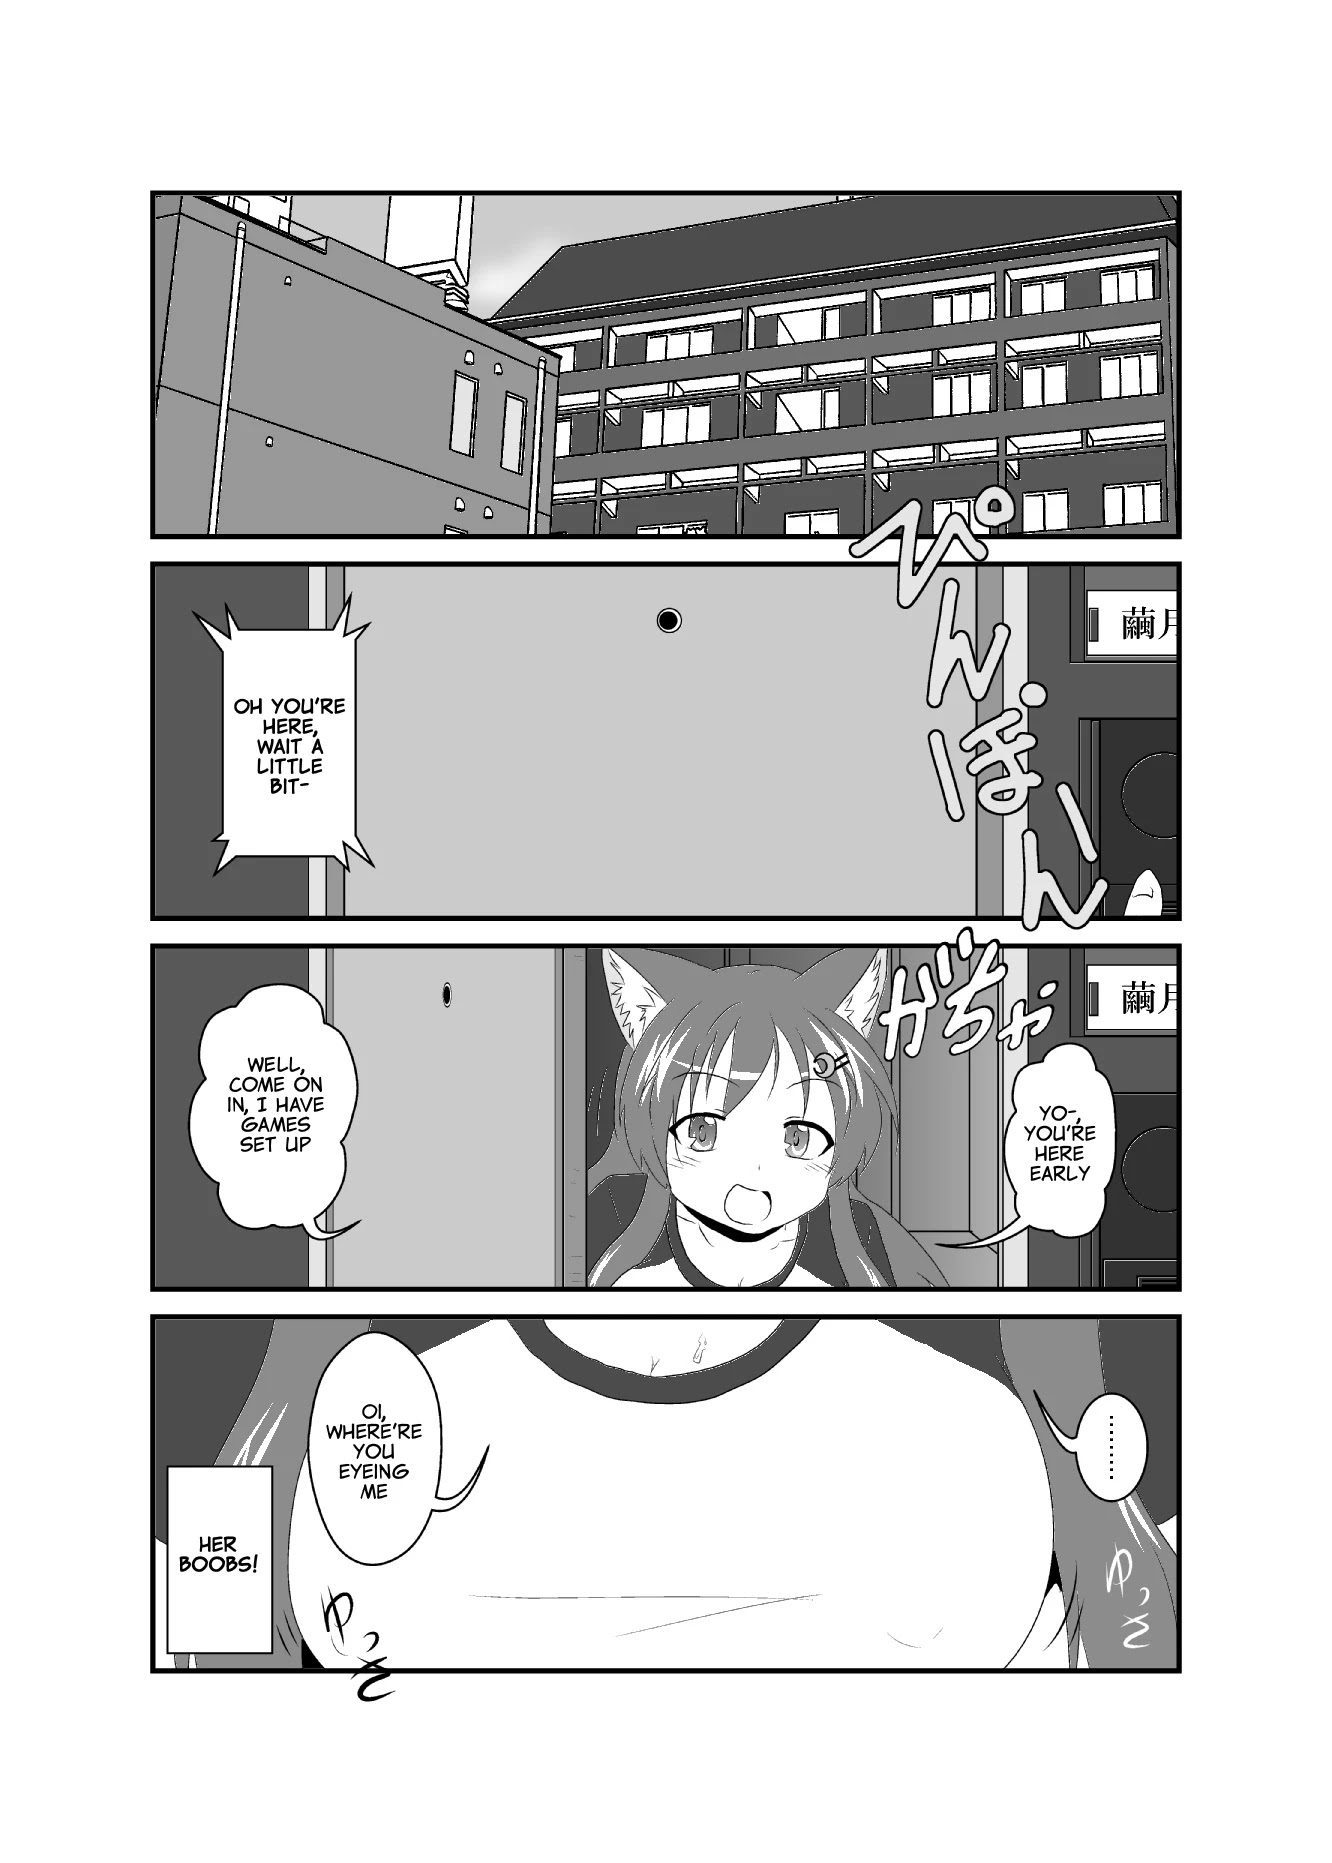 Starting New Life As A Girl - Page 1